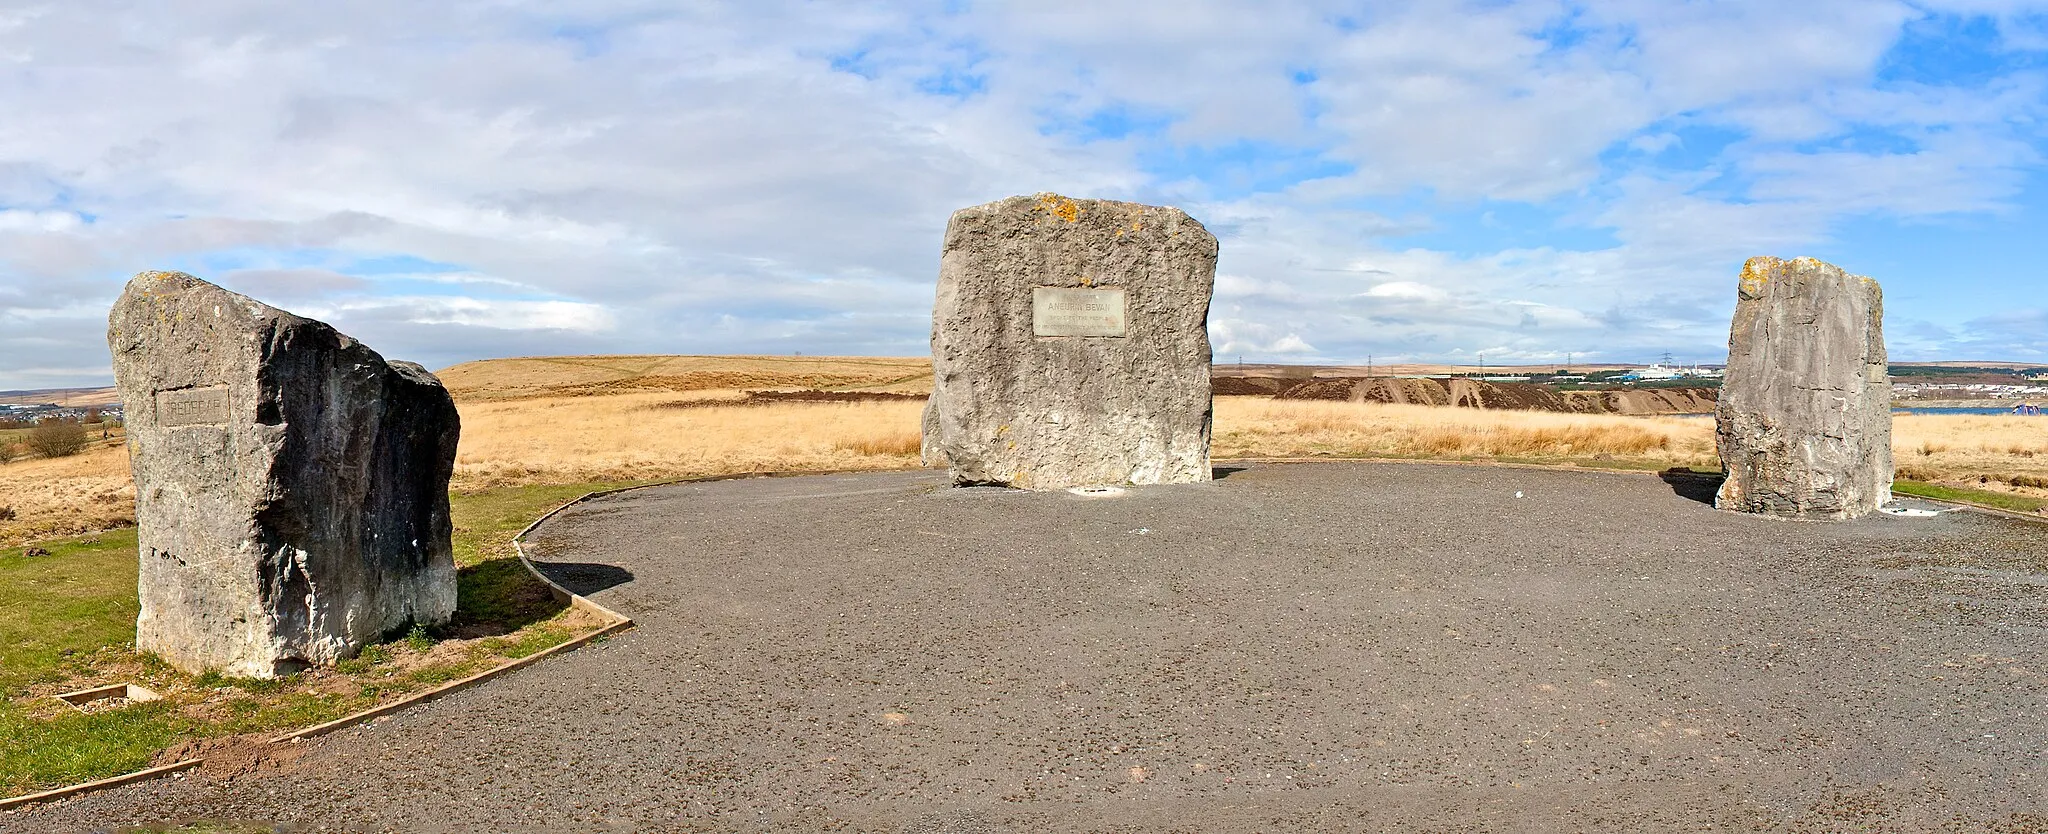 Photo showing: The memorial stones of Aneurin Bevan in Tredegar